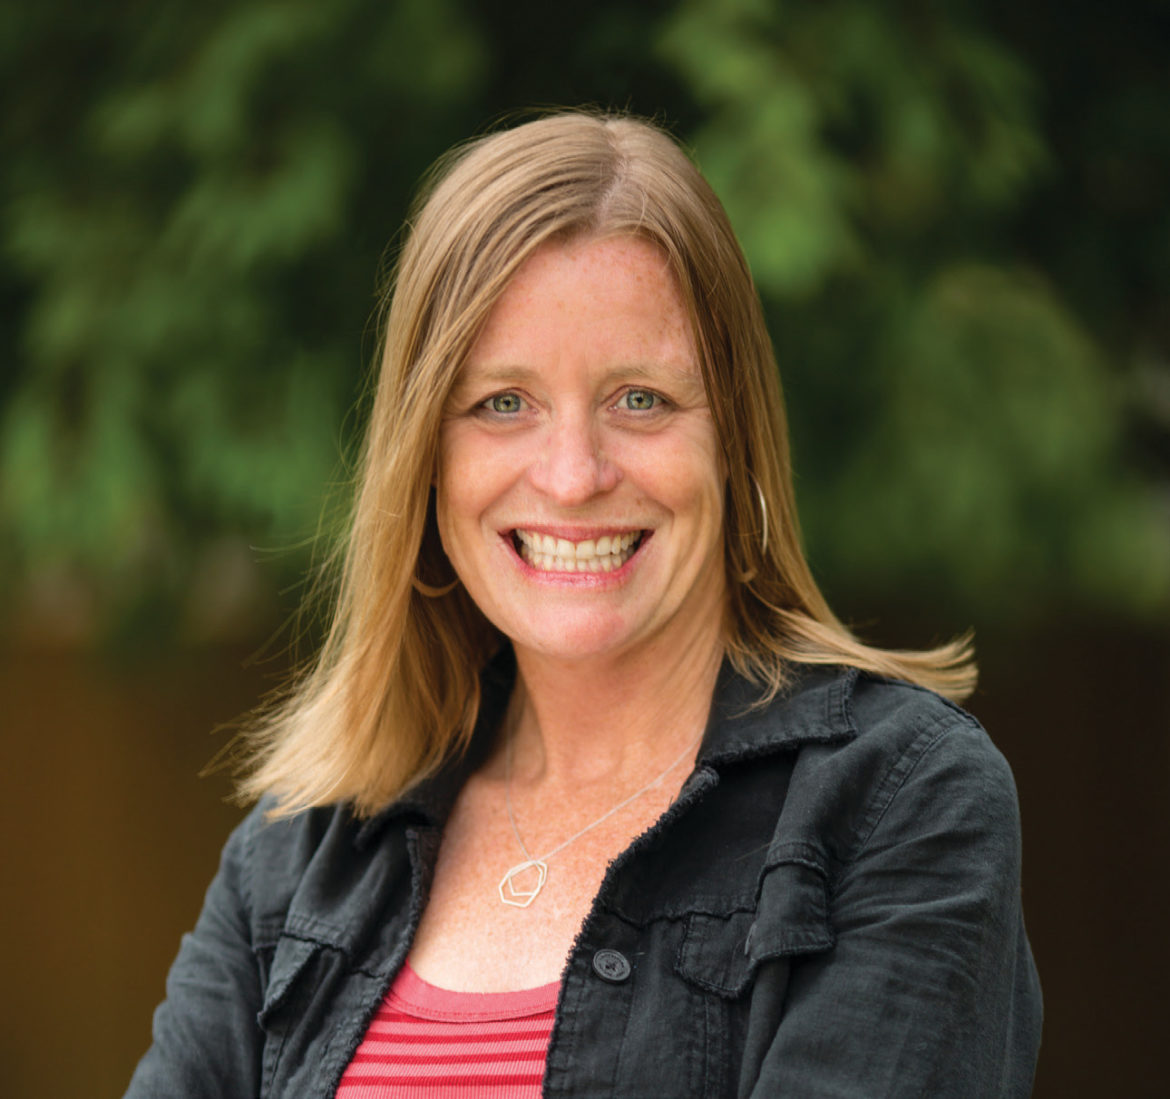 Kate Fitzpatrick, the new executive director of Deschutes River Conservancy, thinks big.